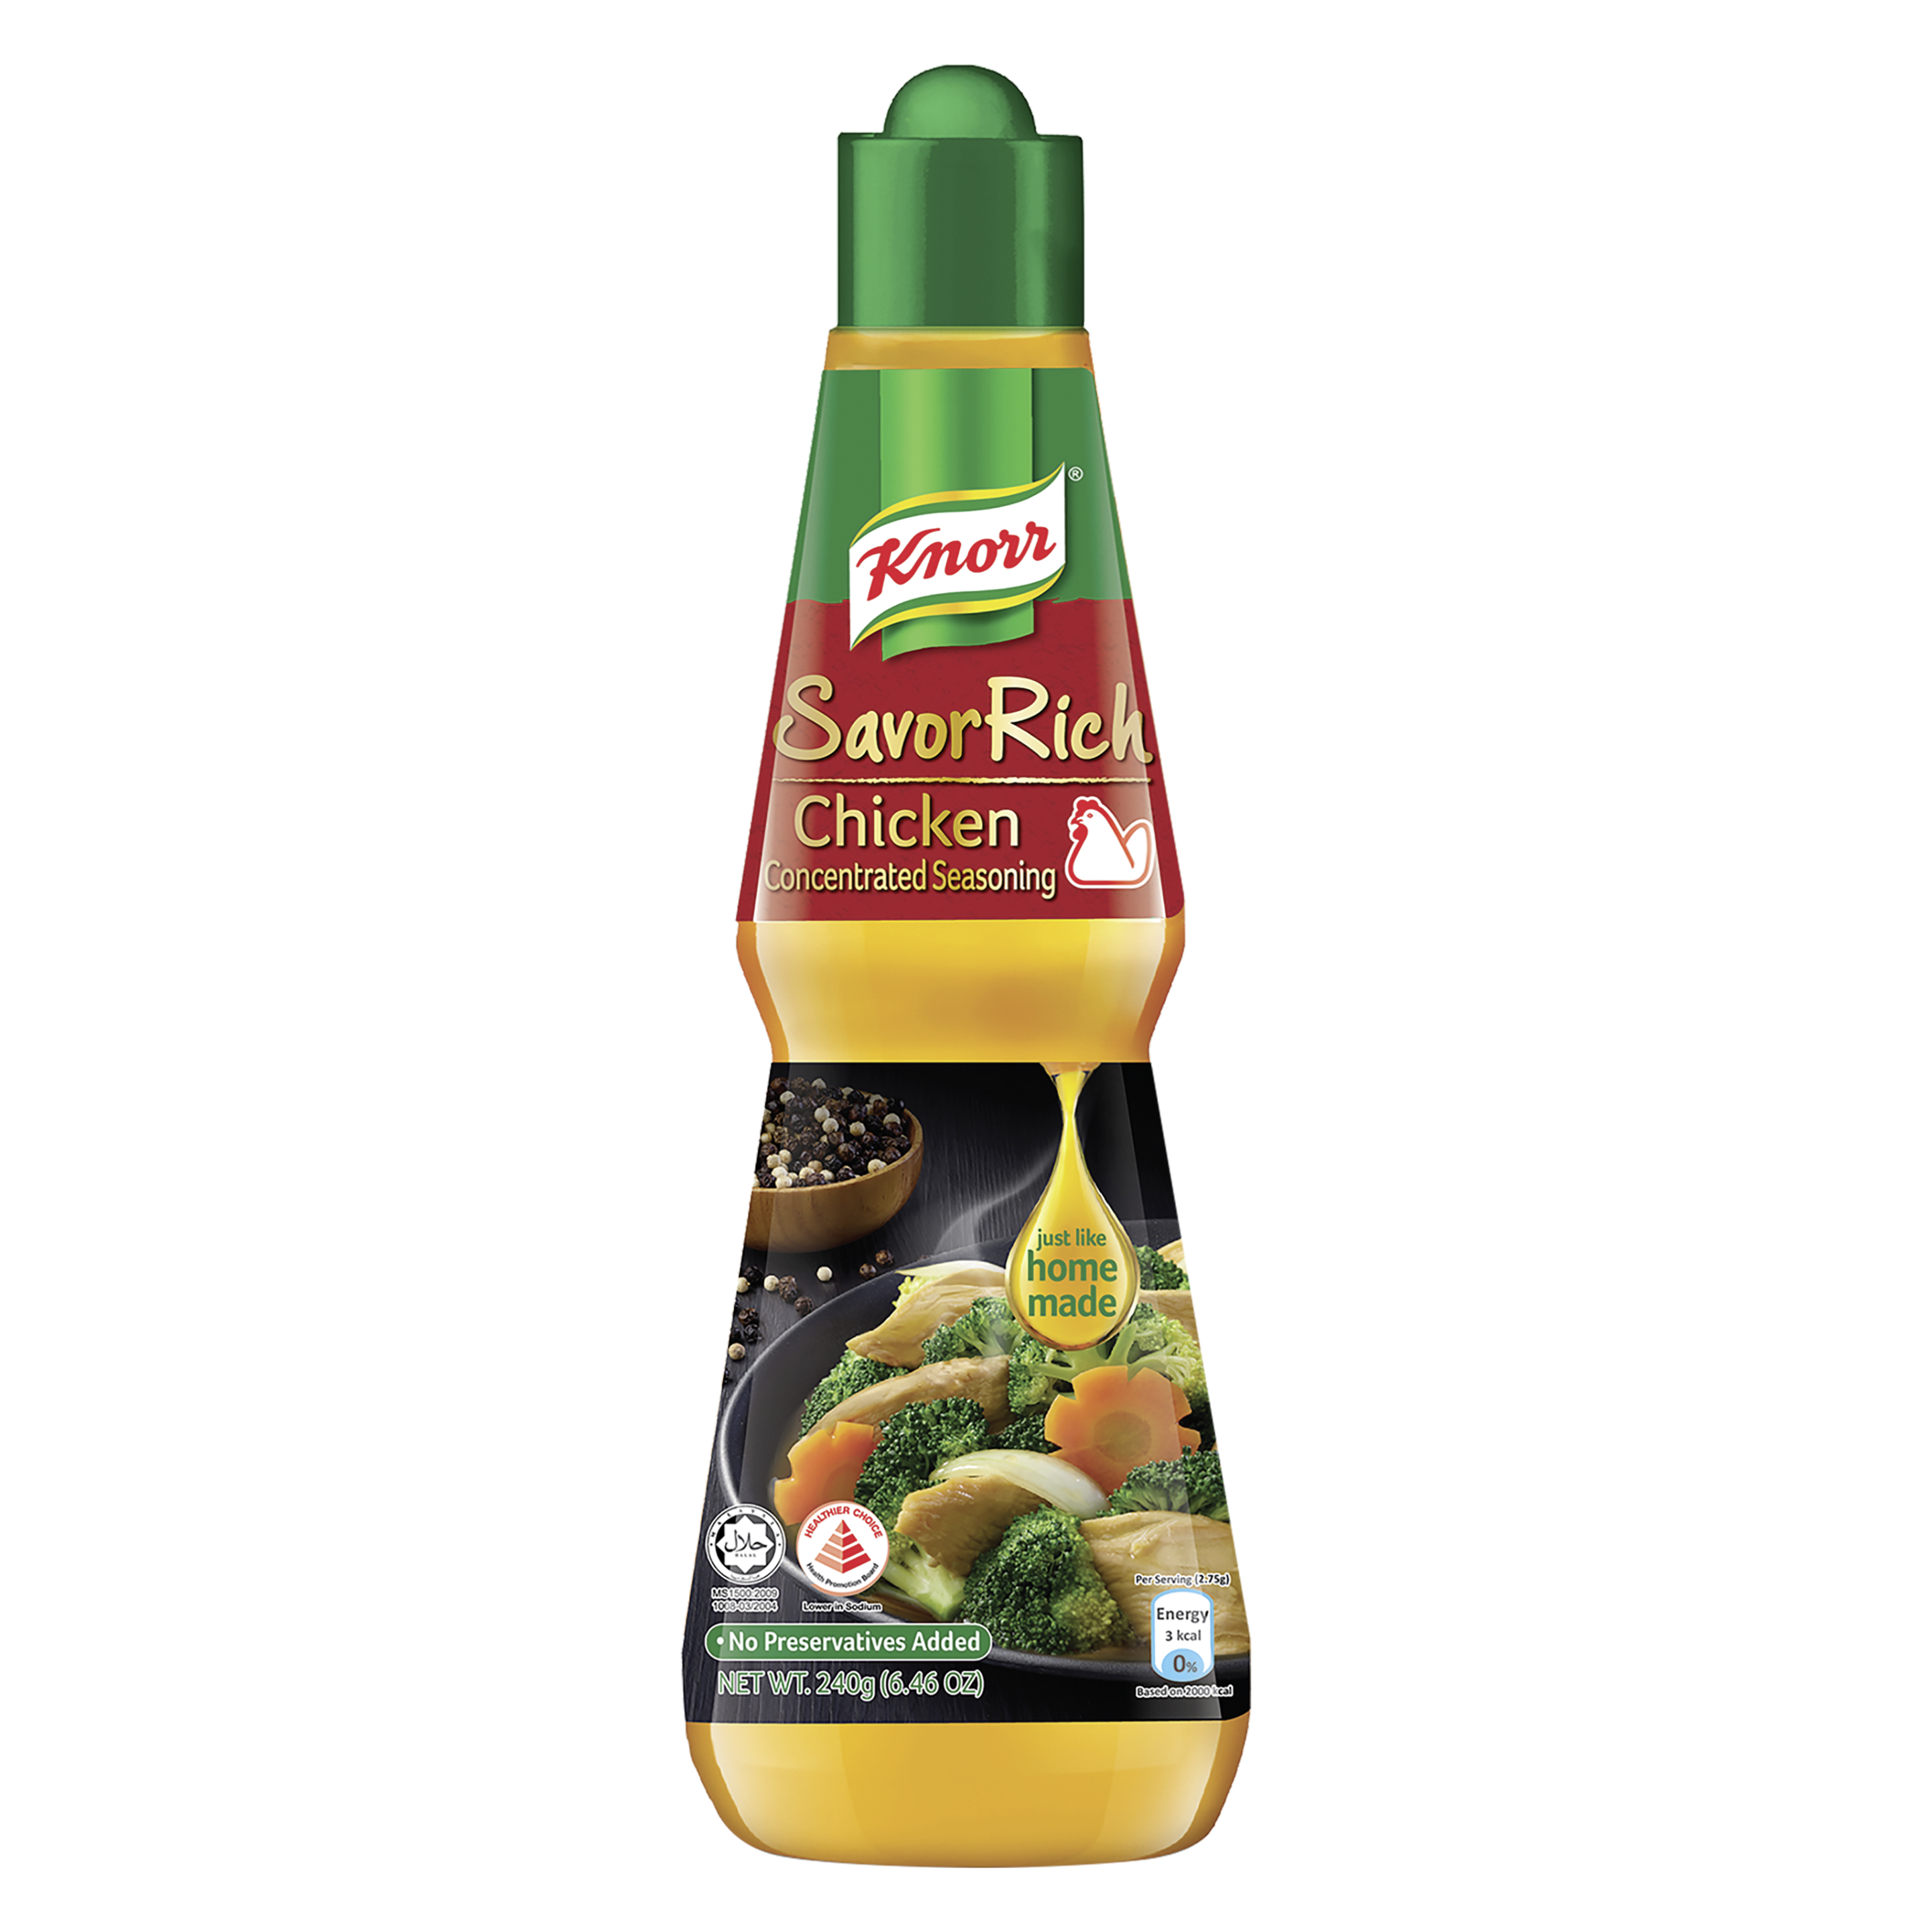 Knorr SavorRich Chicken Concentrated Seasoning